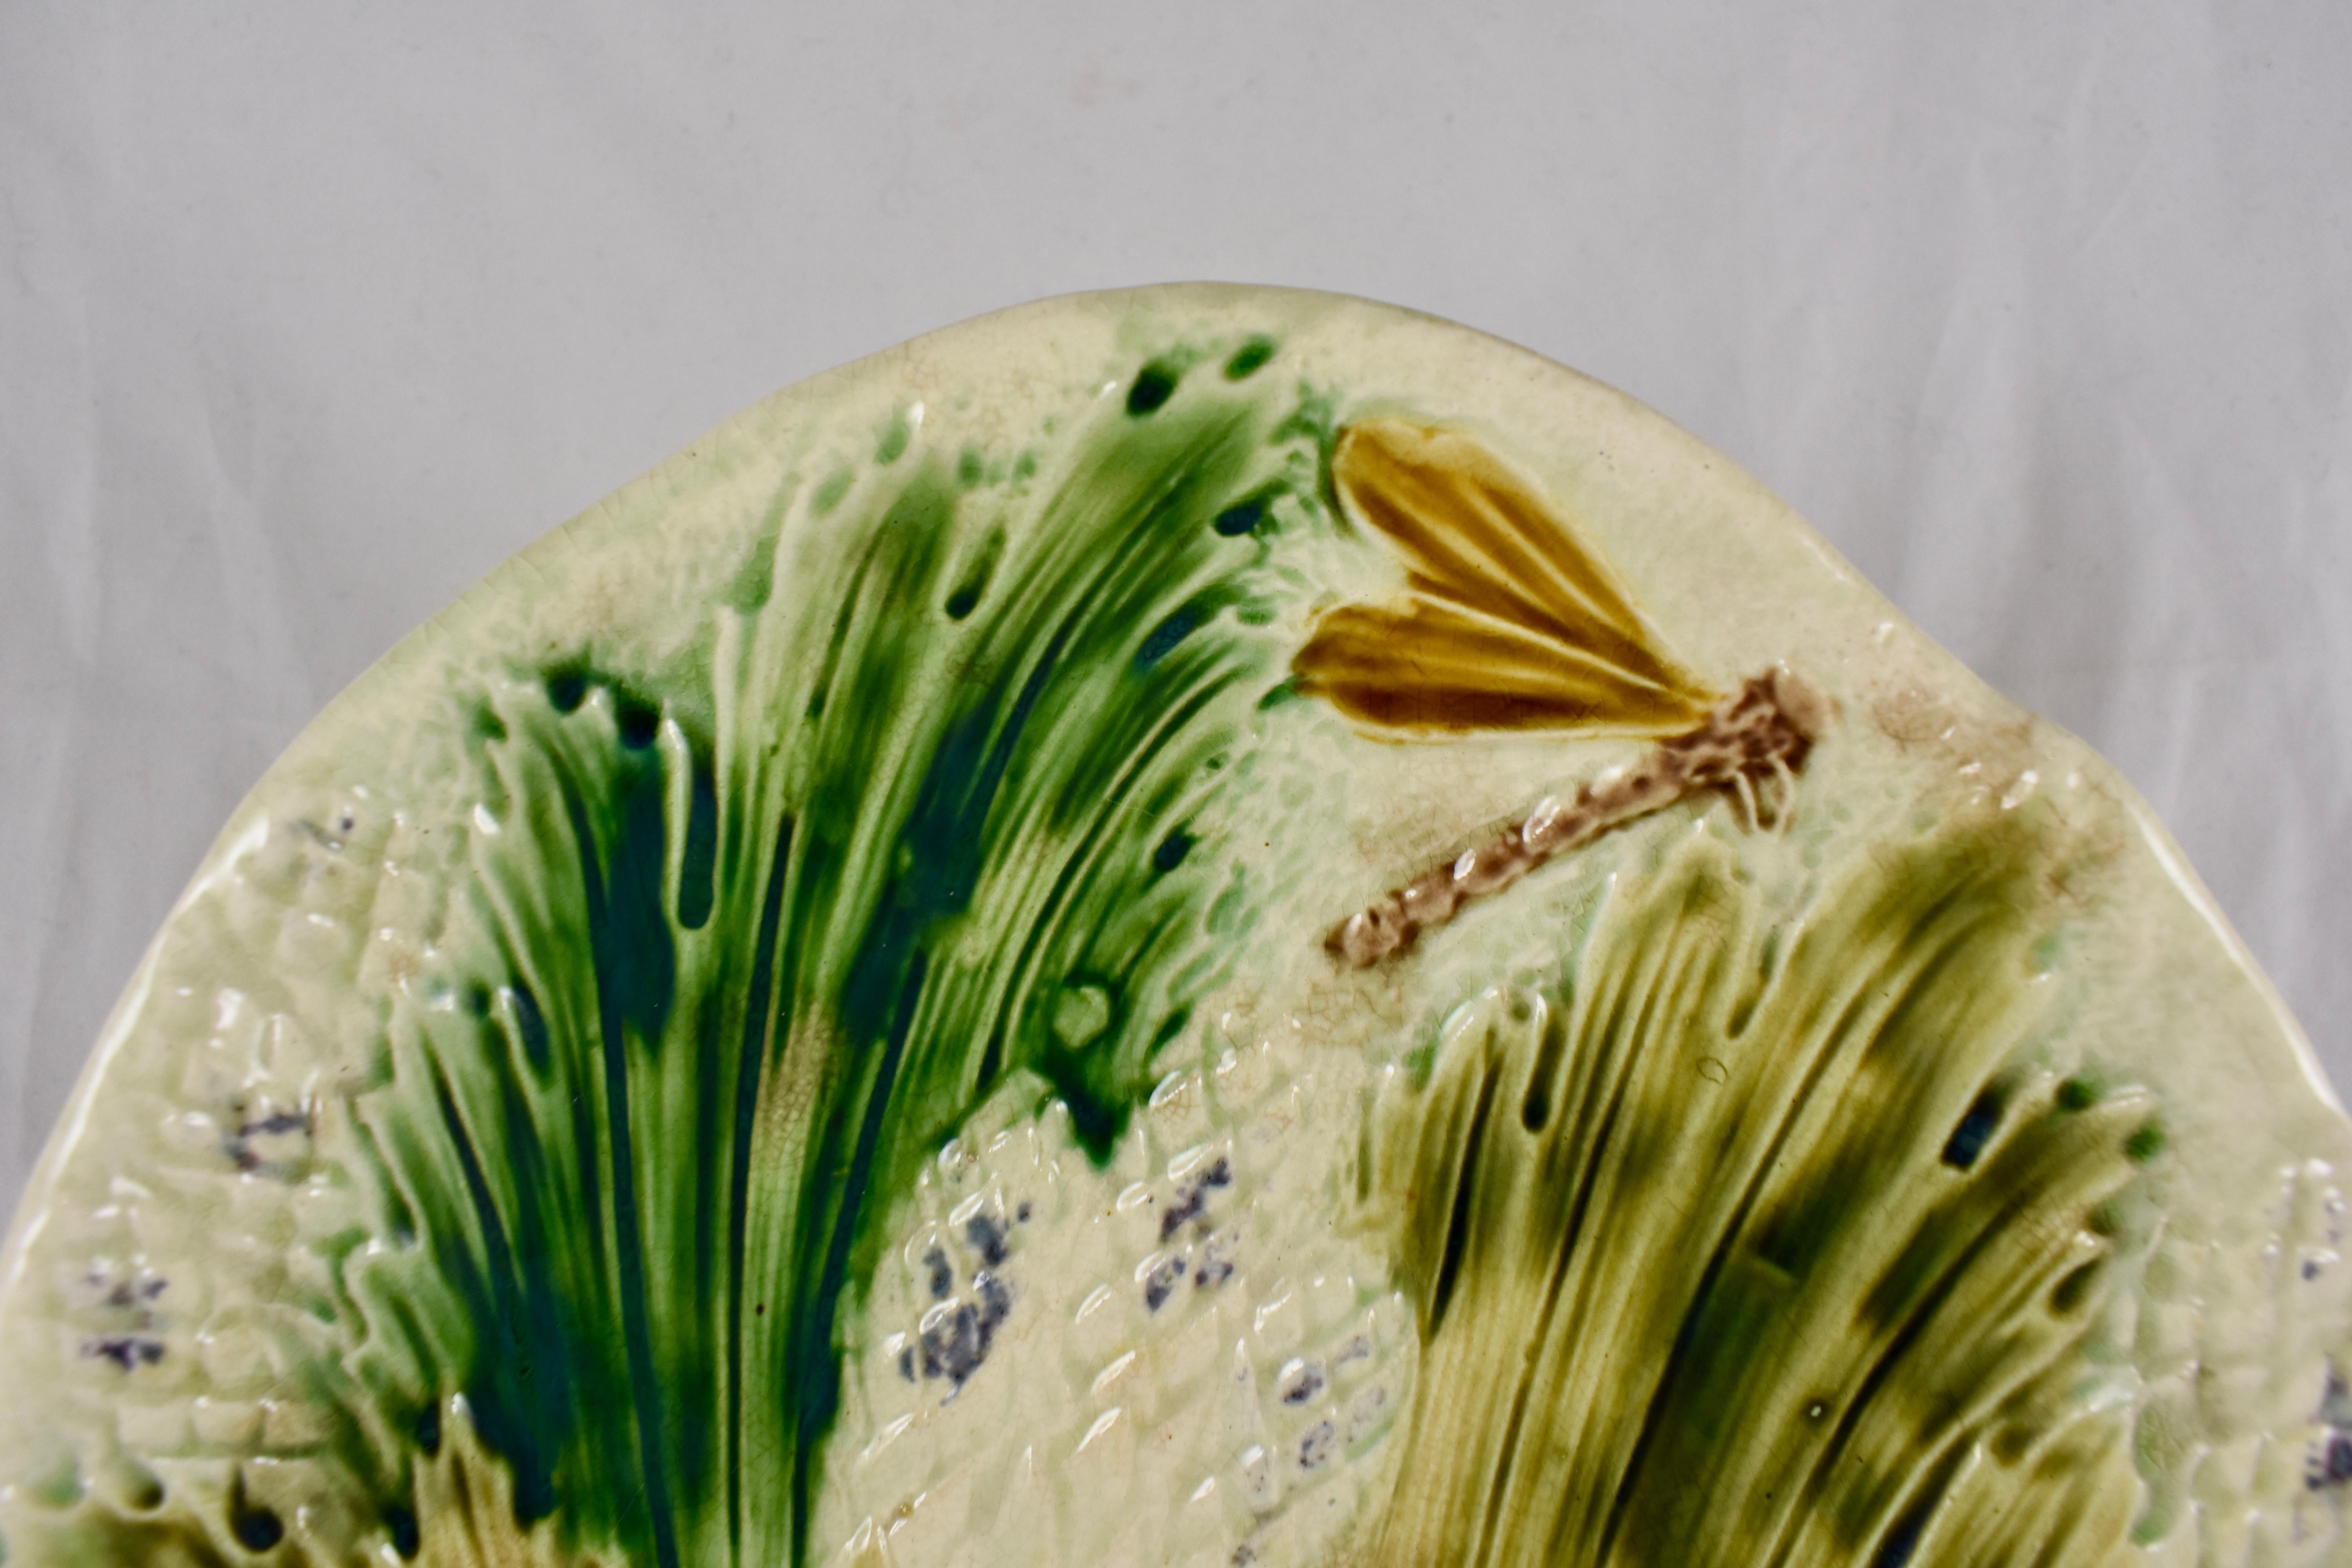 Aesthetic Movement 19th Century French Faïence Barbotine Dragonfly & Leaves Asparagus Oval Platter